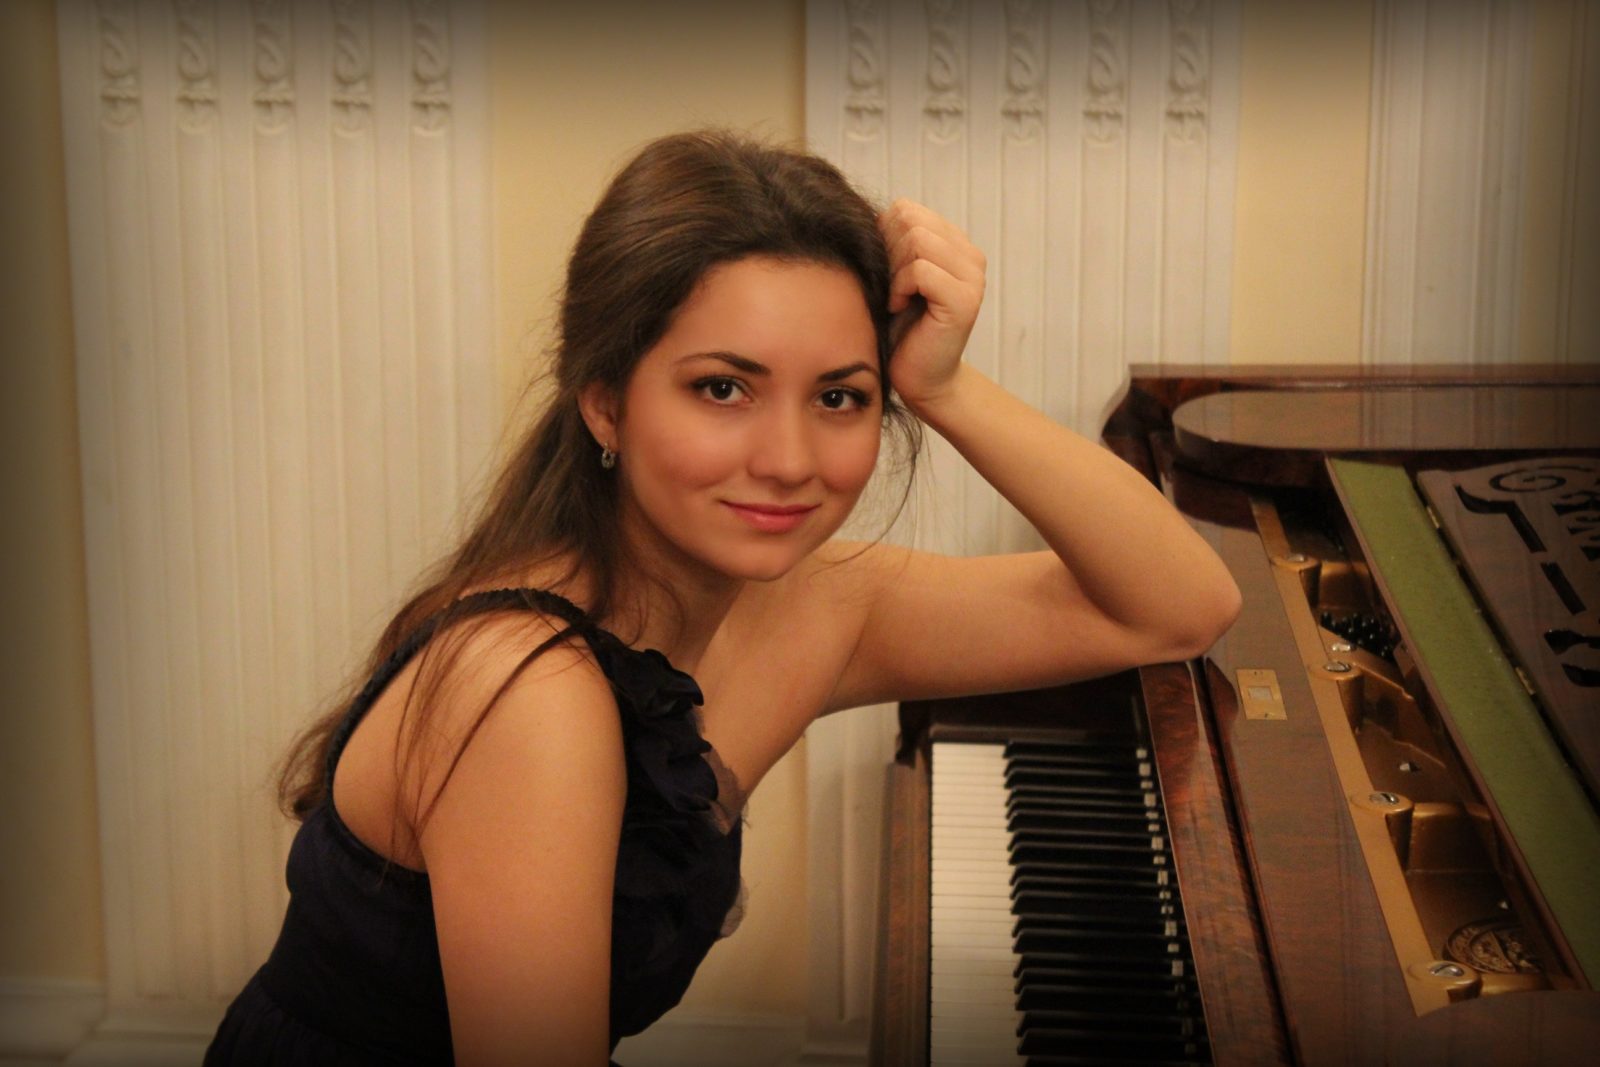 A woman looking into the camera and leaning one elbow on top of a piano